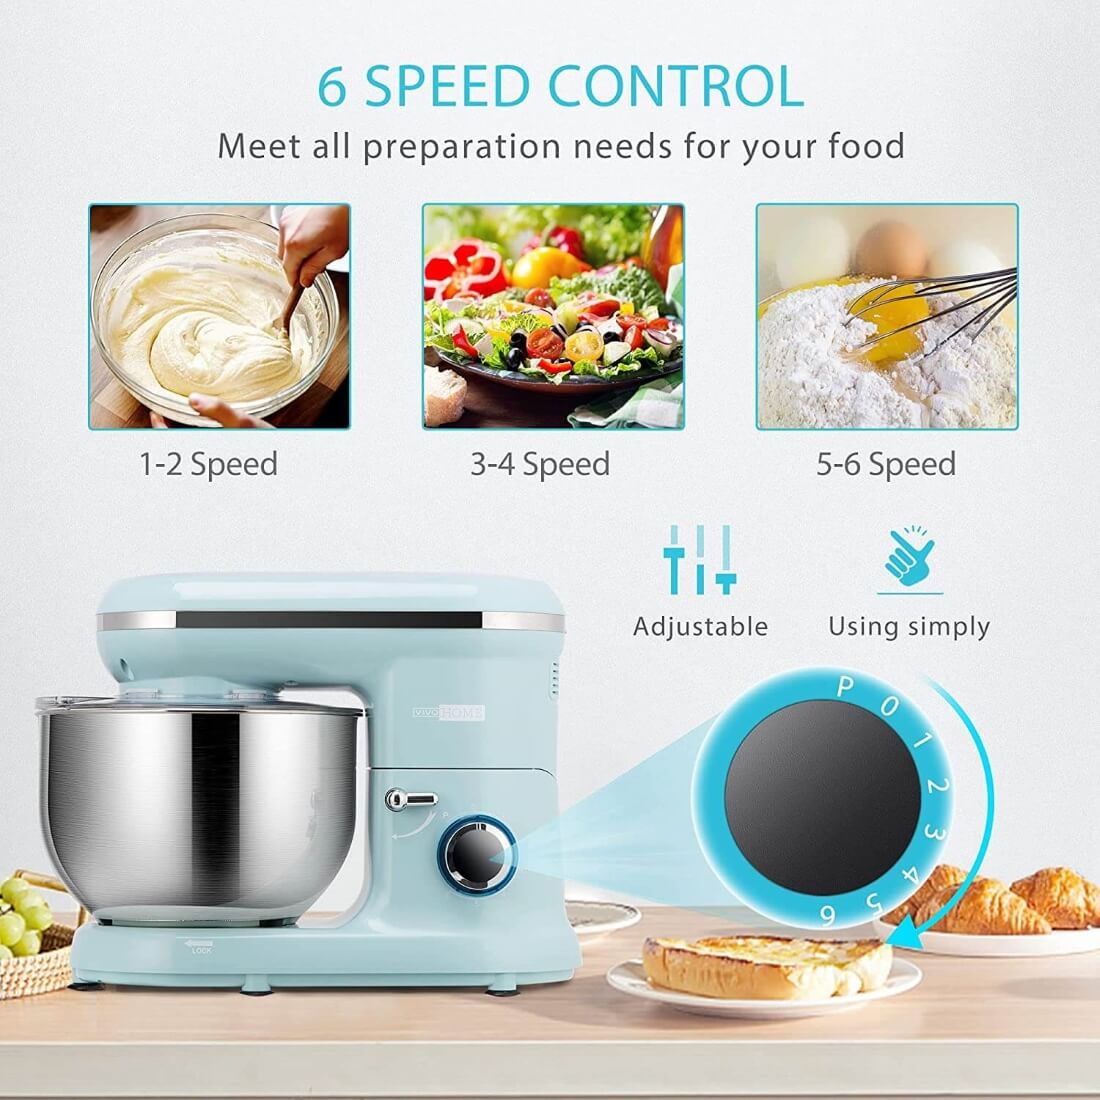 VIVOHOME Stand Mixer, 650W 6 Speed 6 Quart Tilt-Head Kitchen Electric Food Mixer with Beater, Dough Hook and Wire Whip, Pastel Blue